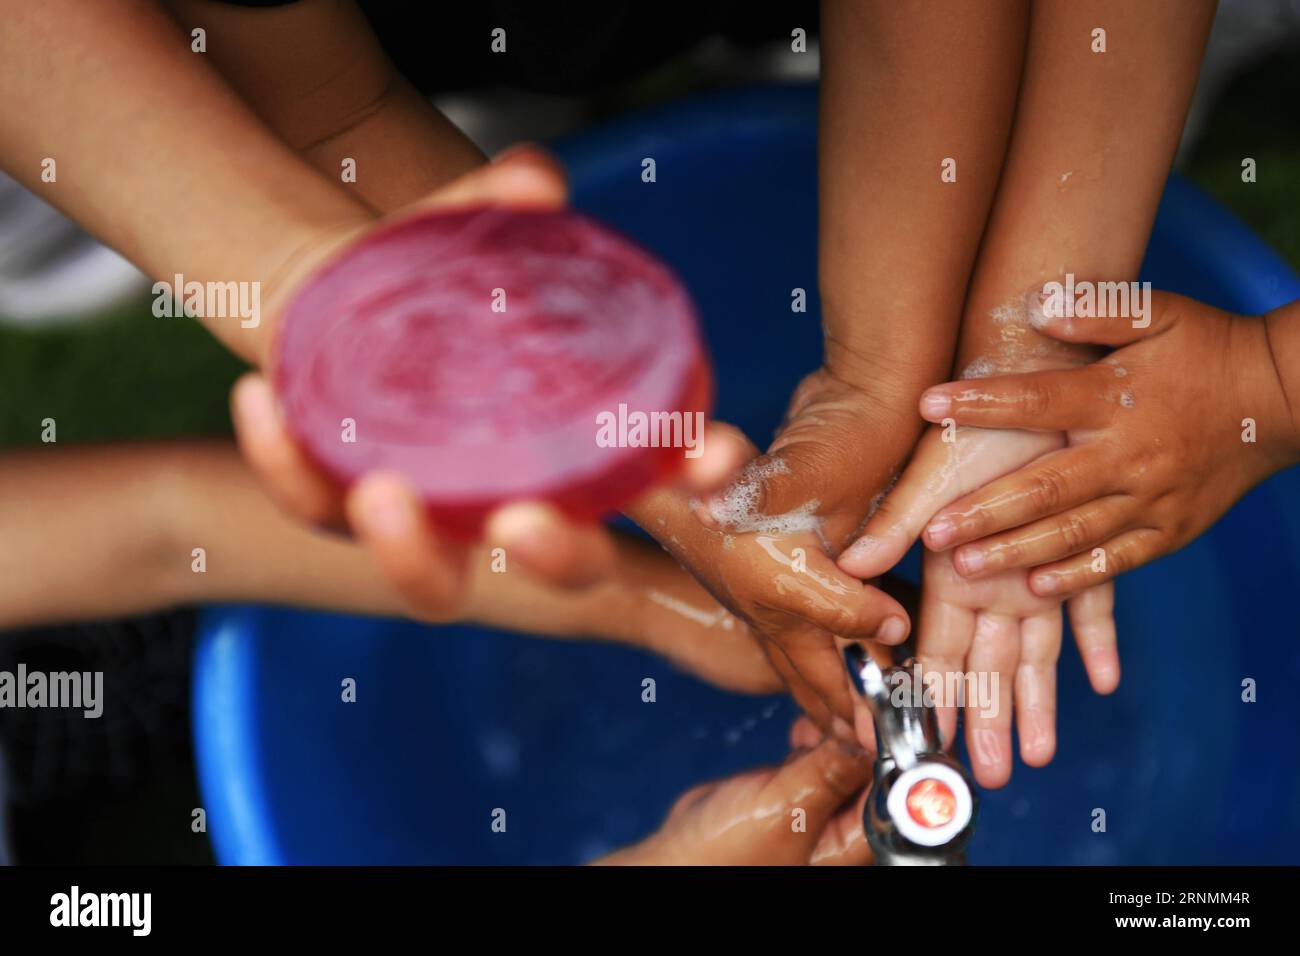 (170603) -- HUACHI, June 3, 2017 -- Children wash their hands before meals at a kindergarten in Xinbao Village of Huachi County, northwest China s Gansu Province, June 3, 2017. To improve the hygiene education in remote areas, China Develpment Research Foundation and Unilever carried out a project to promote hand wash among children in classes. The project so far has covered more than 10,000 rural children in serveral provinces of China. ) (ry) CHINA-GANSU-HUACHI-RURAL KINDERGARTEN-EDUCATION (CN) ChenxBin PUBLICATIONxNOTxINxCHN   Huachi June 3 2017 Children Wash their Hands Before Meals AT a K Stock Photo